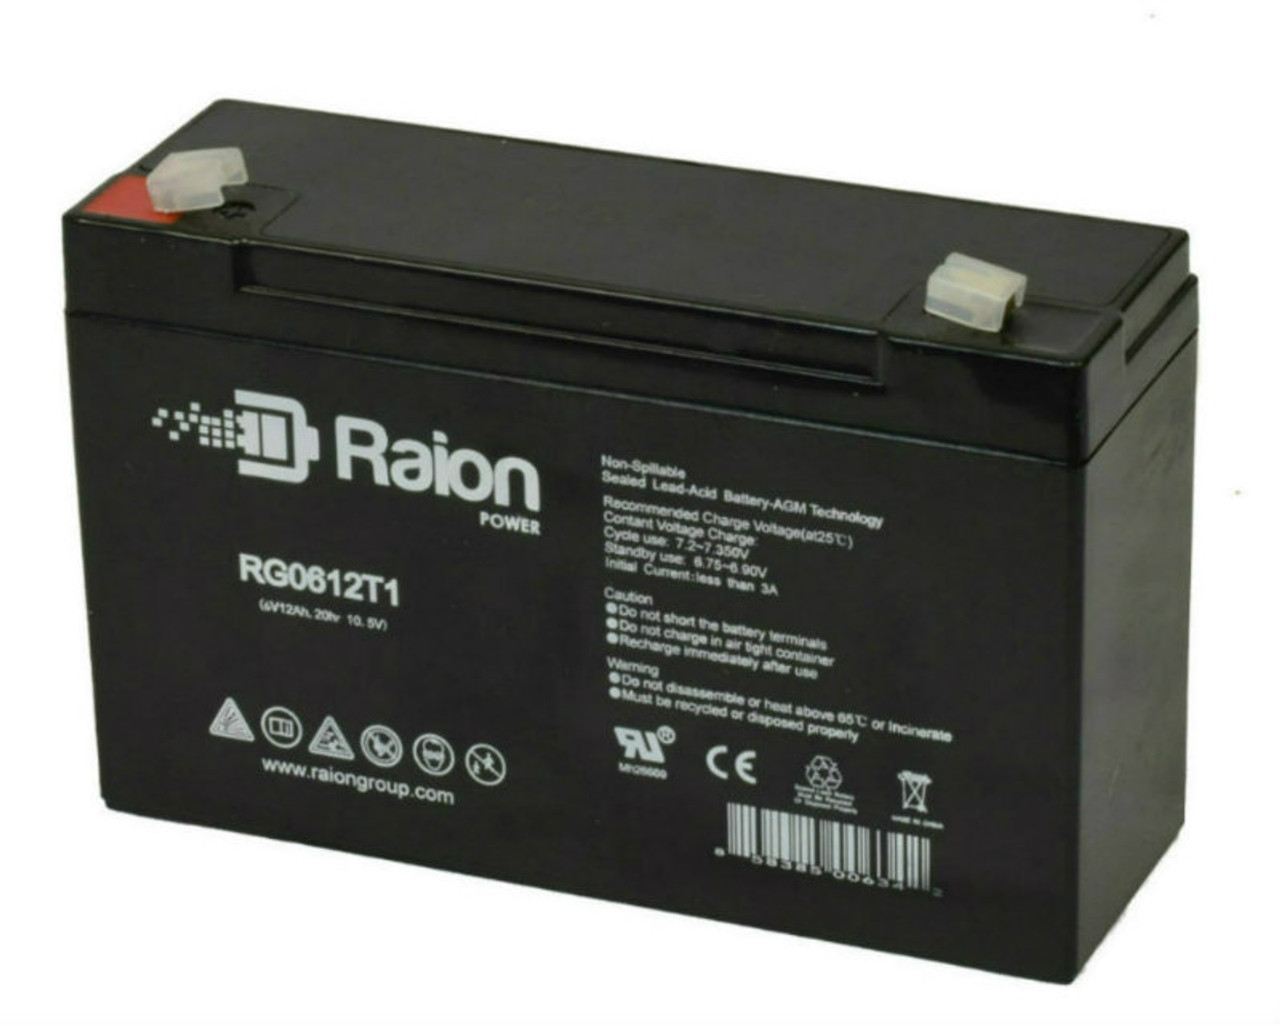 Raion Power RG06120T1 Replacement Emergency Light Battery for Para Systems S610-SL